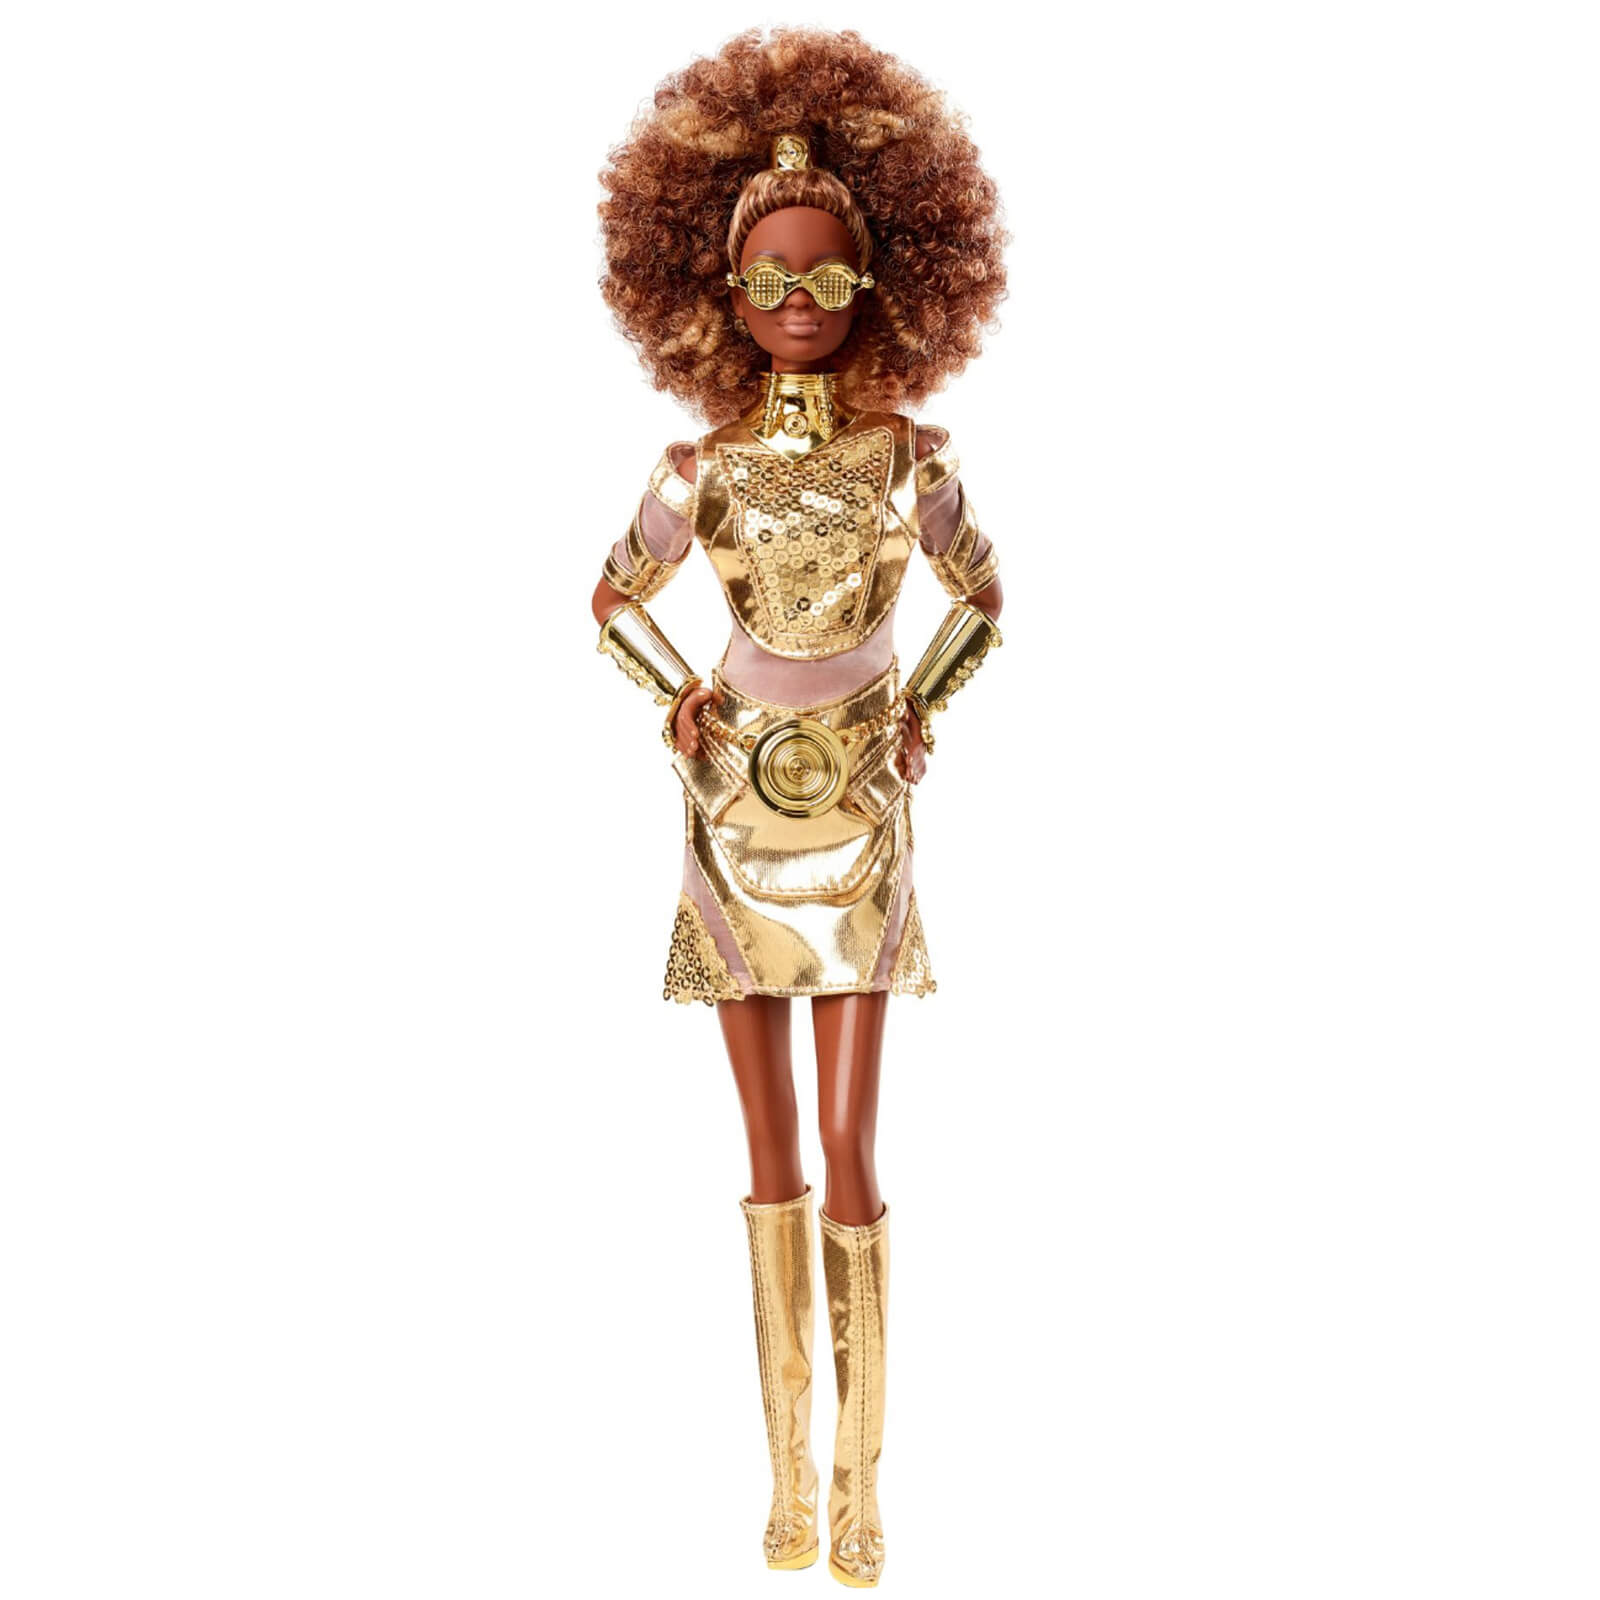 Barbie Signature Collection Star Wars C-3PO Doll